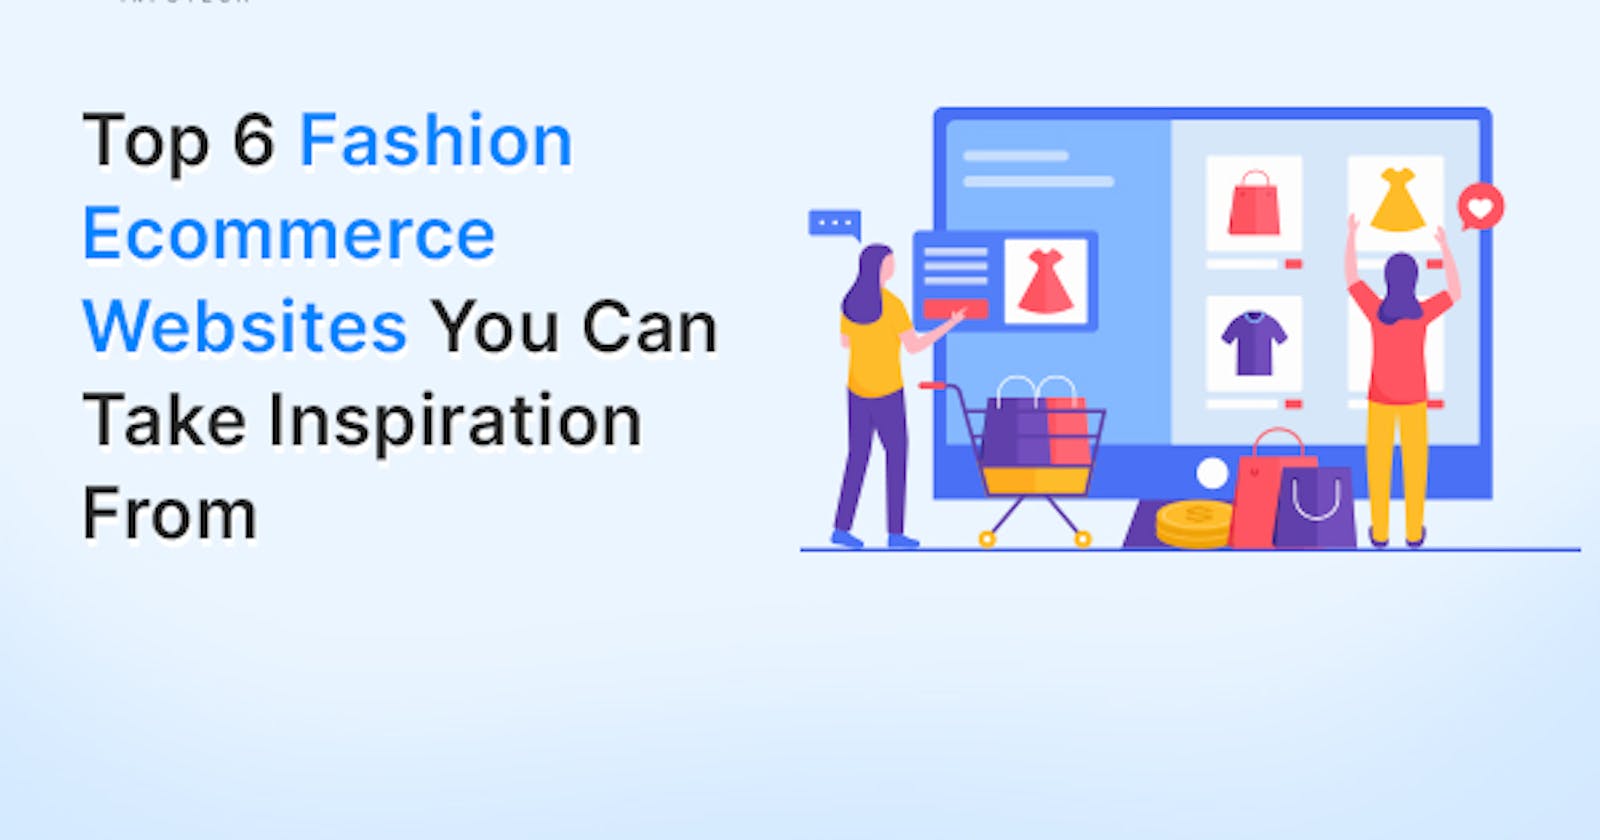 Top 6 Fashion Ecommerce Websites You Can Take Inspiration From